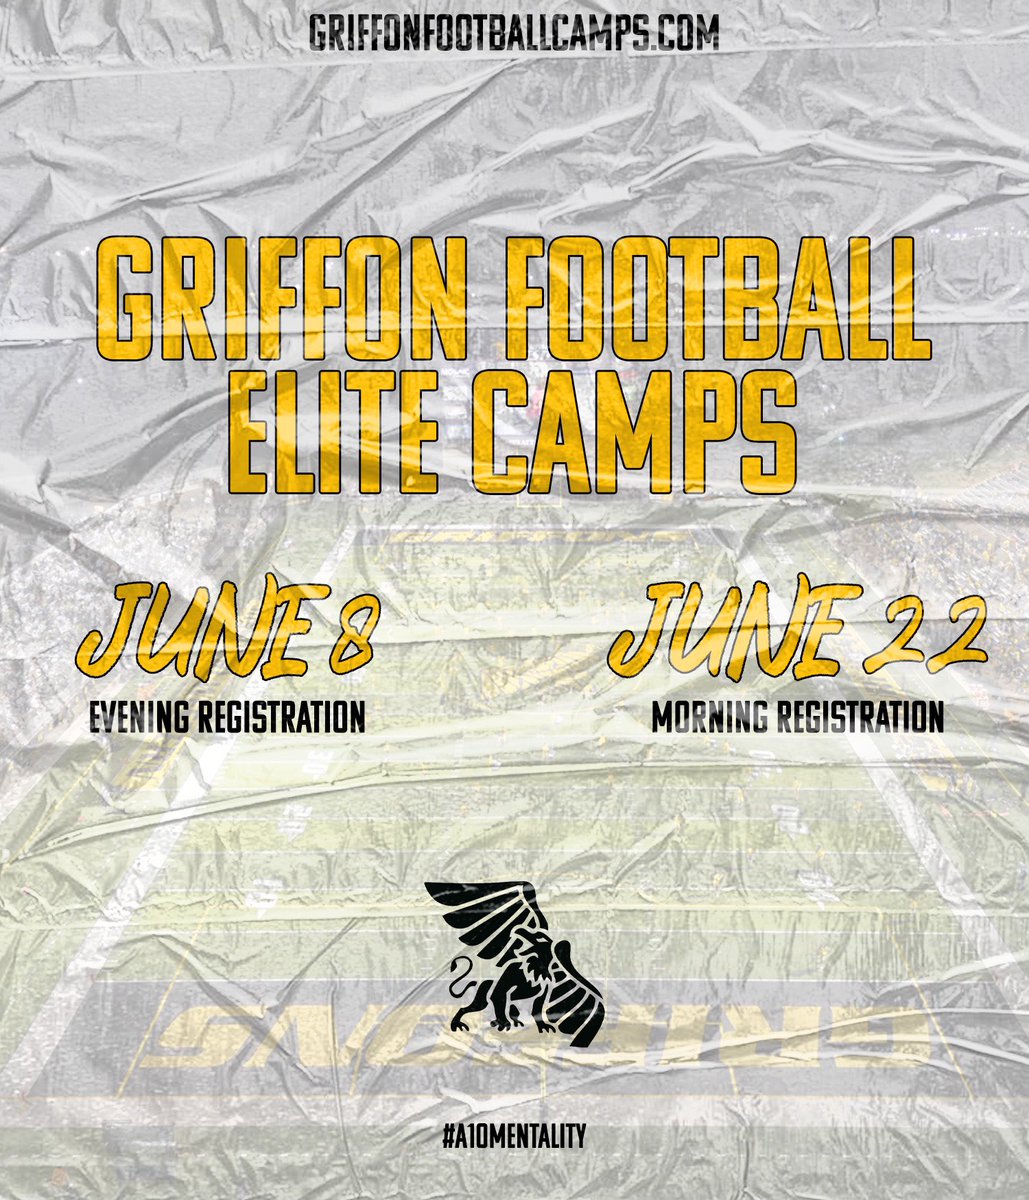 Arkansas🗣️🗣️ Who’s next?! Don’t miss a chance to come work and meet our staff! Come compete and get a live evaluation! griffonfootballcamps.com #TooFly25 #A10Mentality